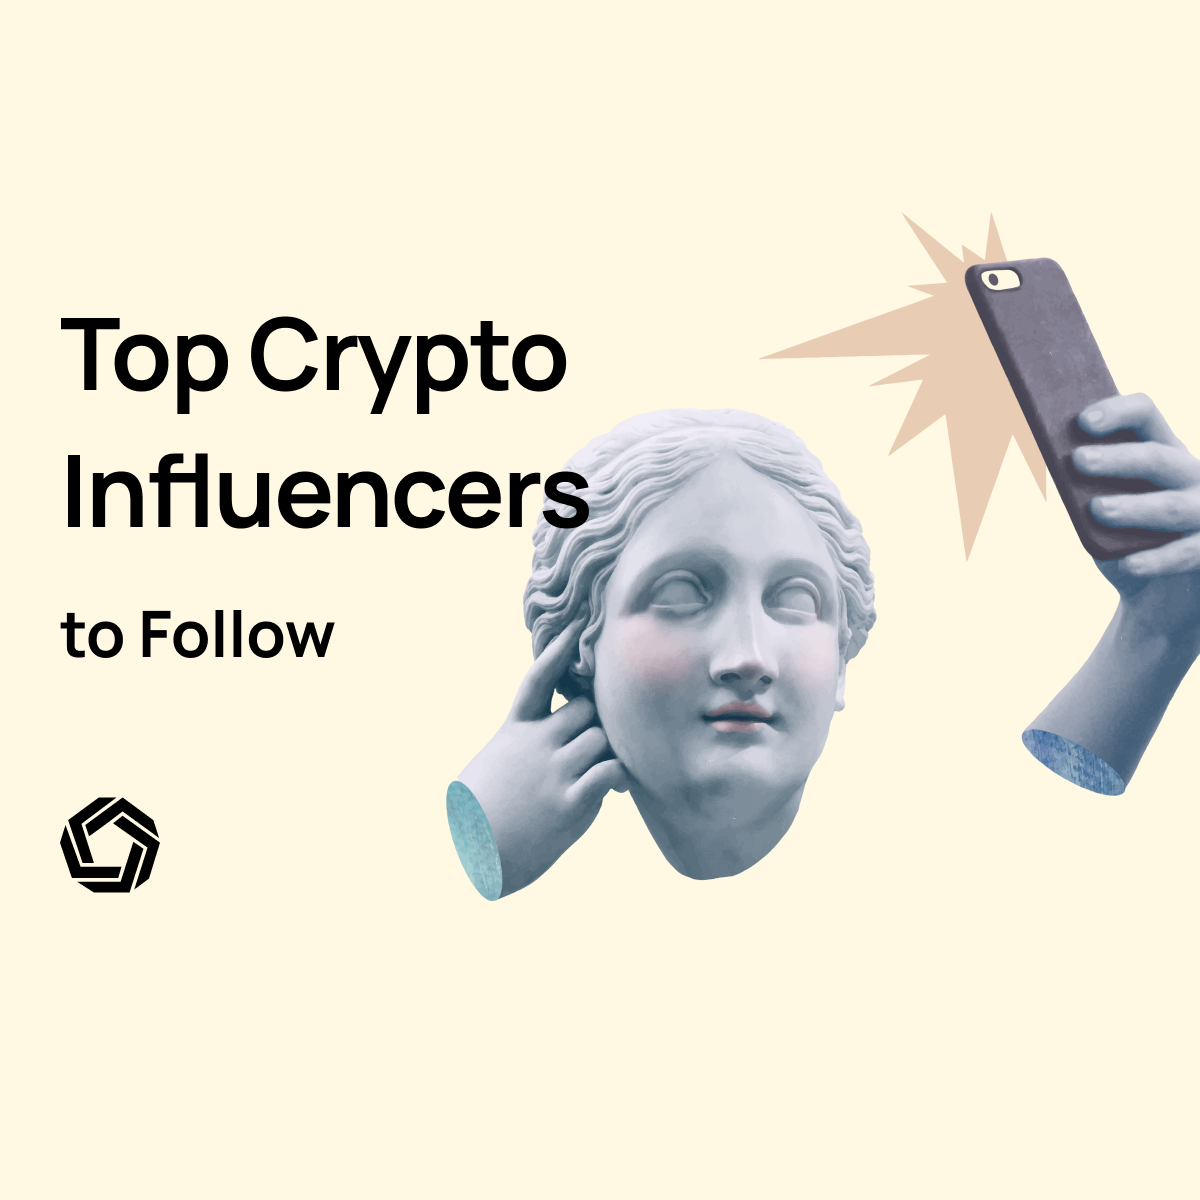 Top Crypto Influencers to Follow